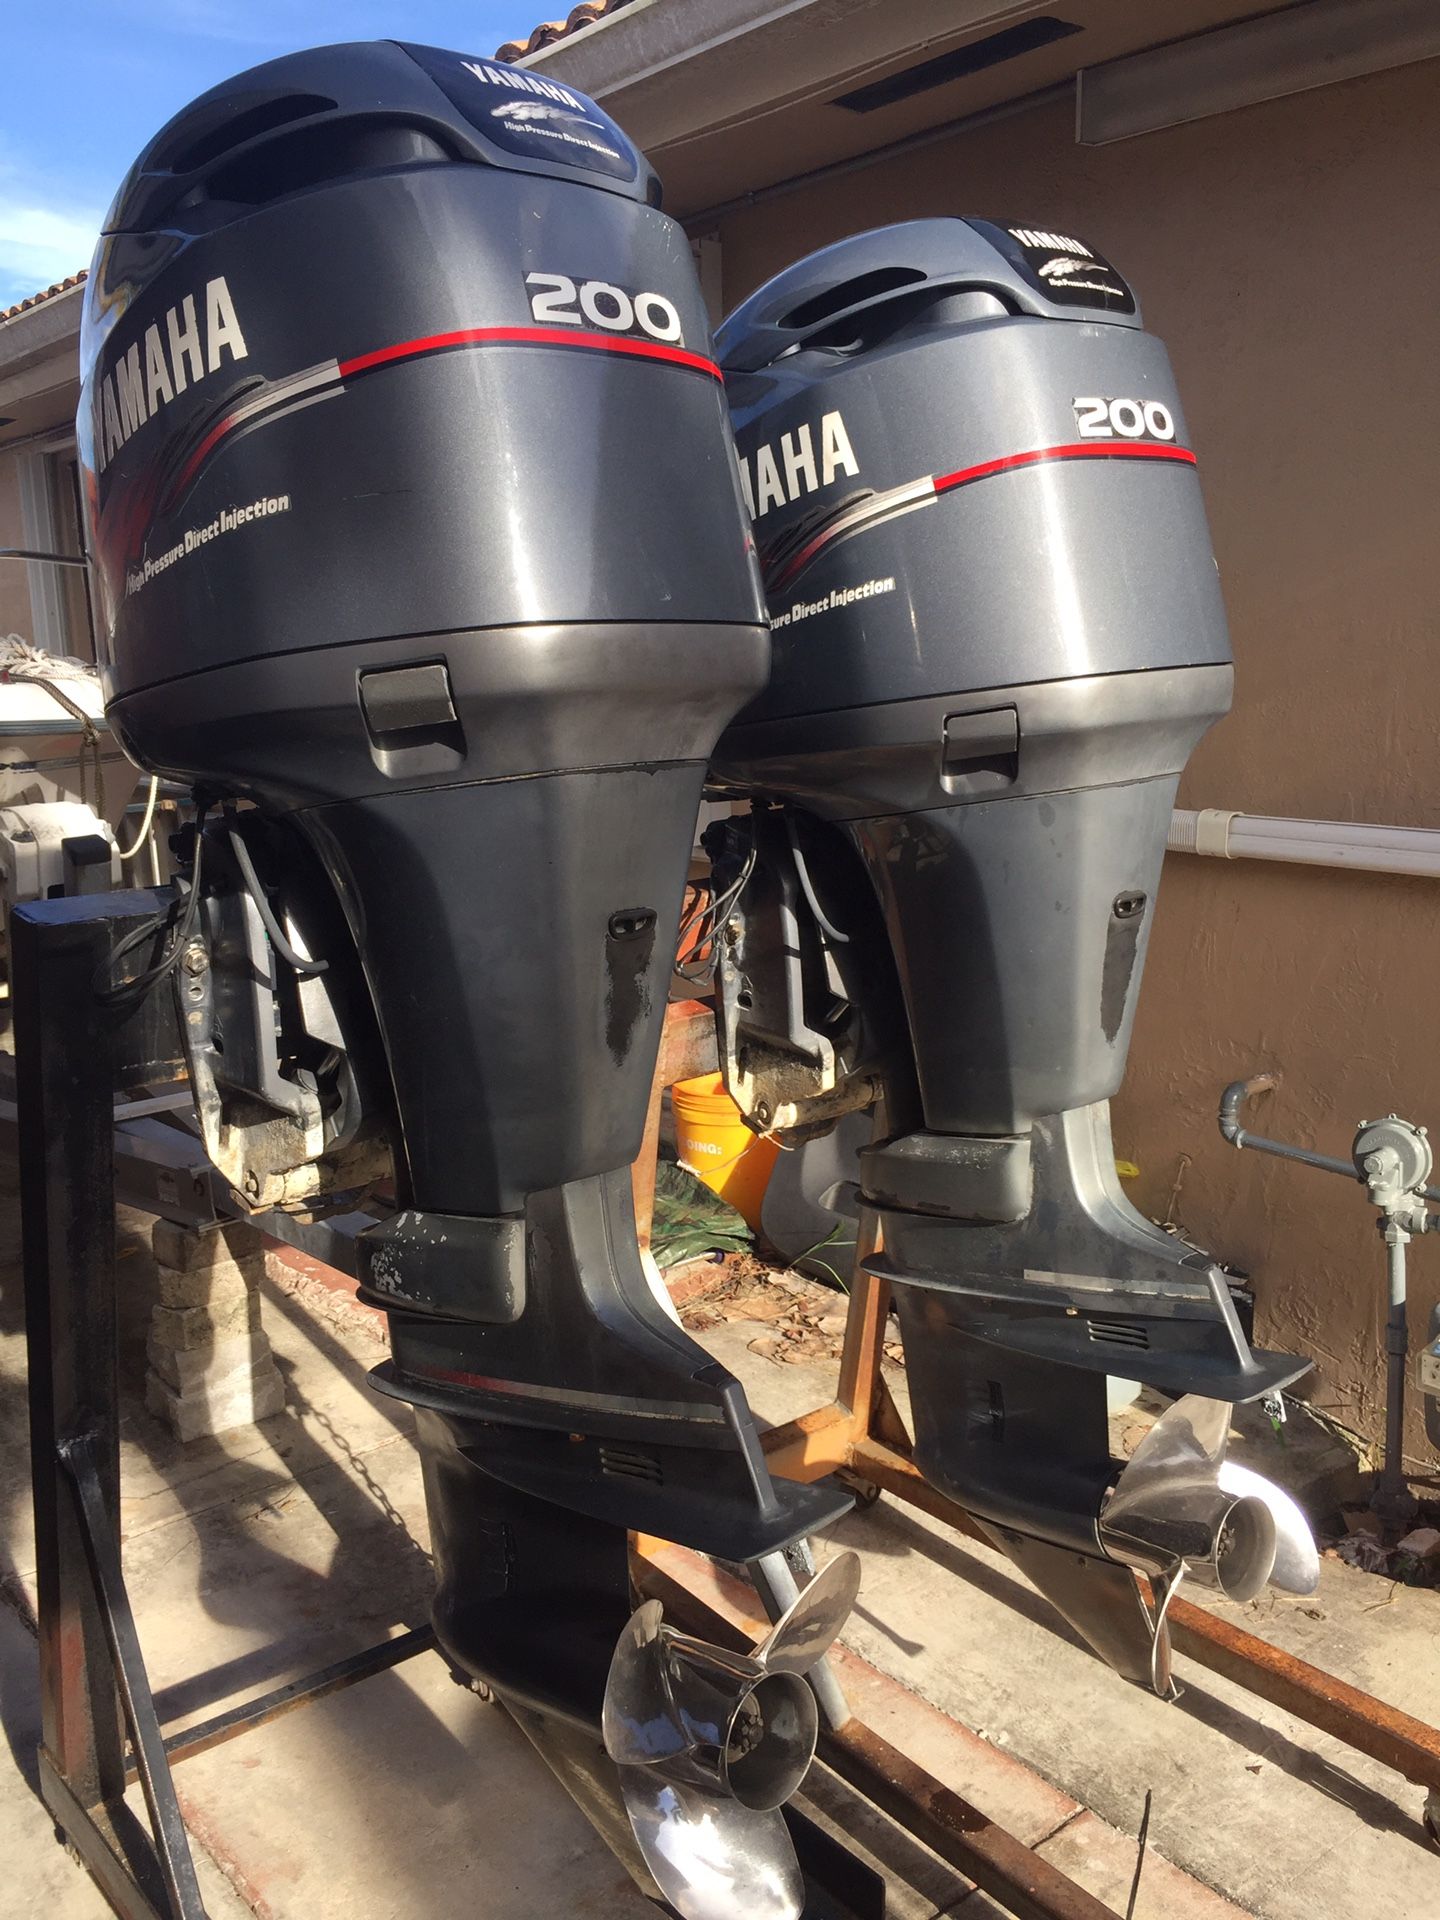 Pair 2001 Yamaha 200 hp Hpdi Fuel Injection Outboard Motors with All Controls, Gauges, Props!